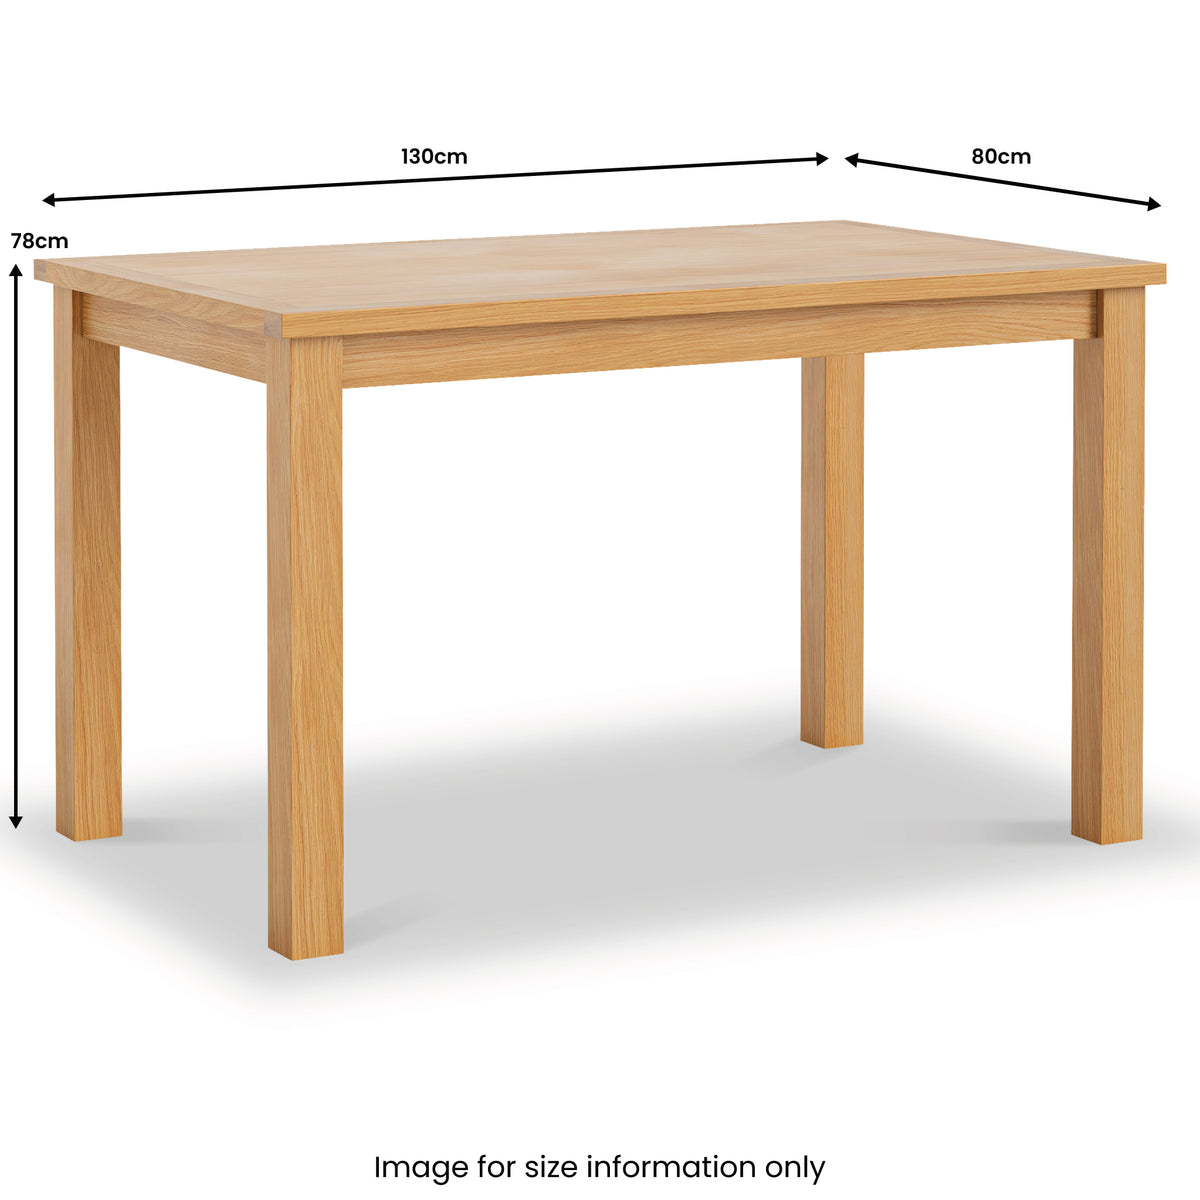 London Oak 130cm Fixed Dining Table dimensions